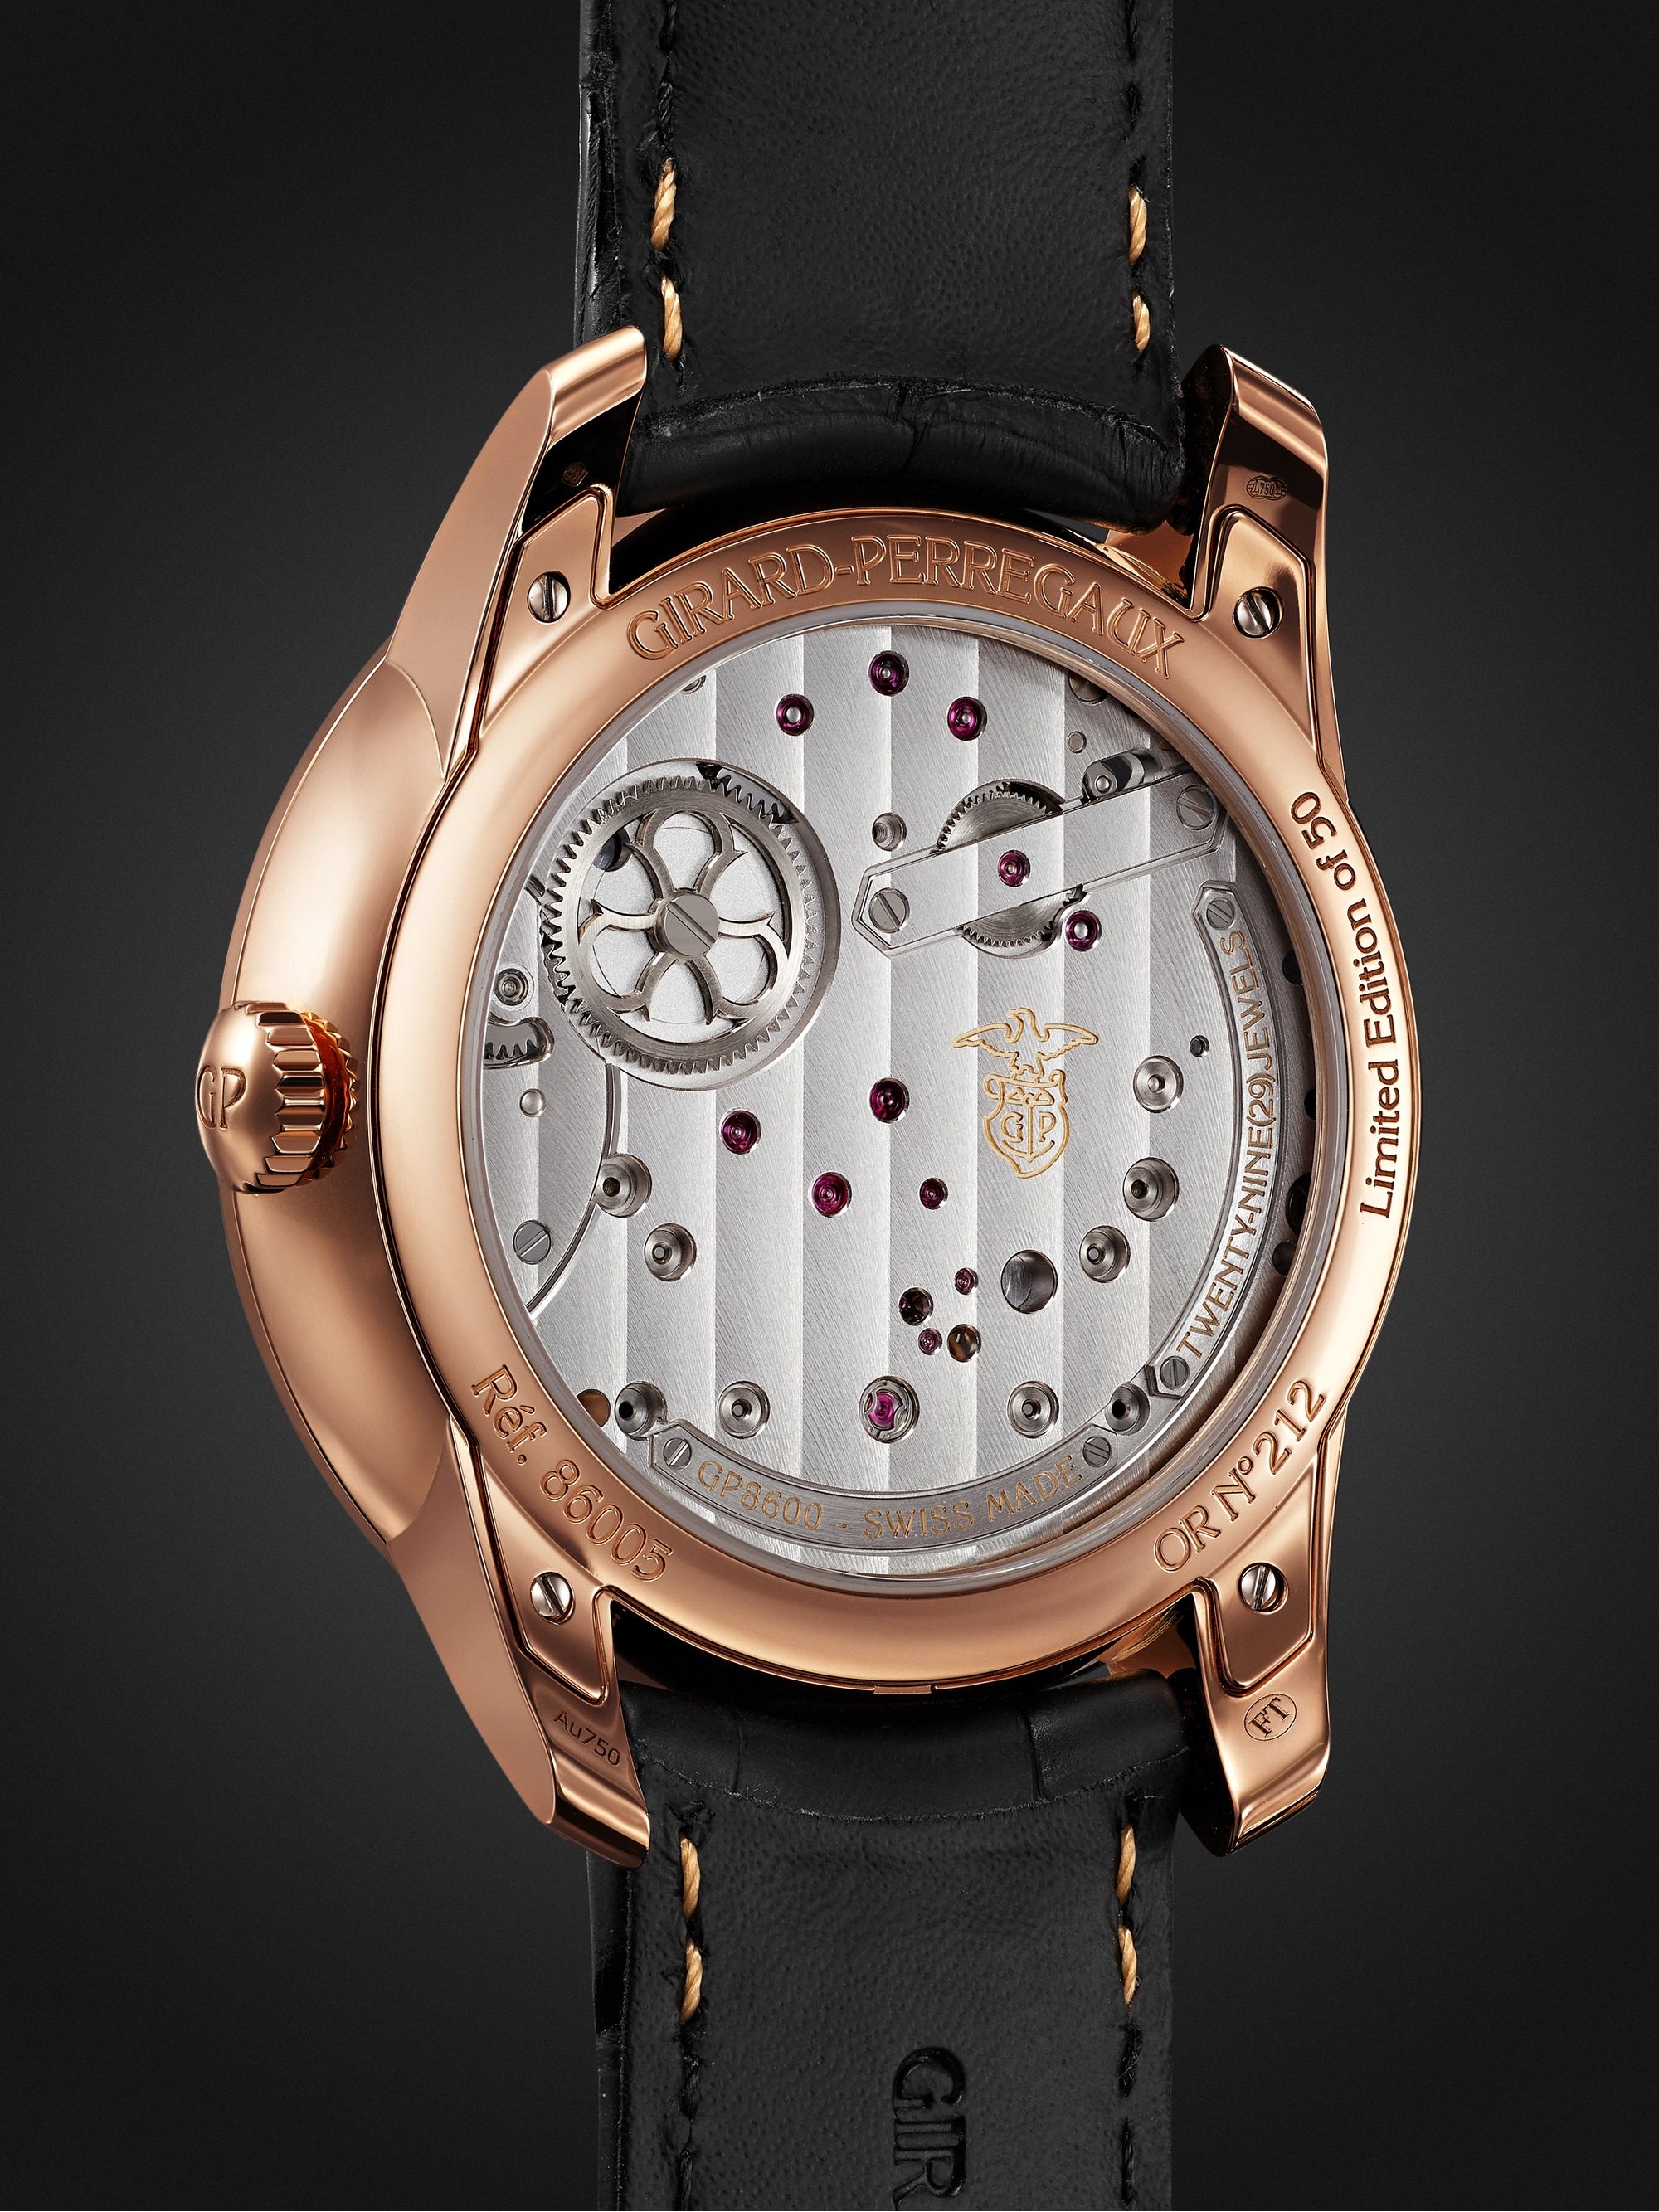 GIRARD-PERREGAUX Classic Bridges Limited Edition Automatic Skeleton 40mm Pink Gold and Alligator Watch, Ref. No. 86005-52-002-BB6A